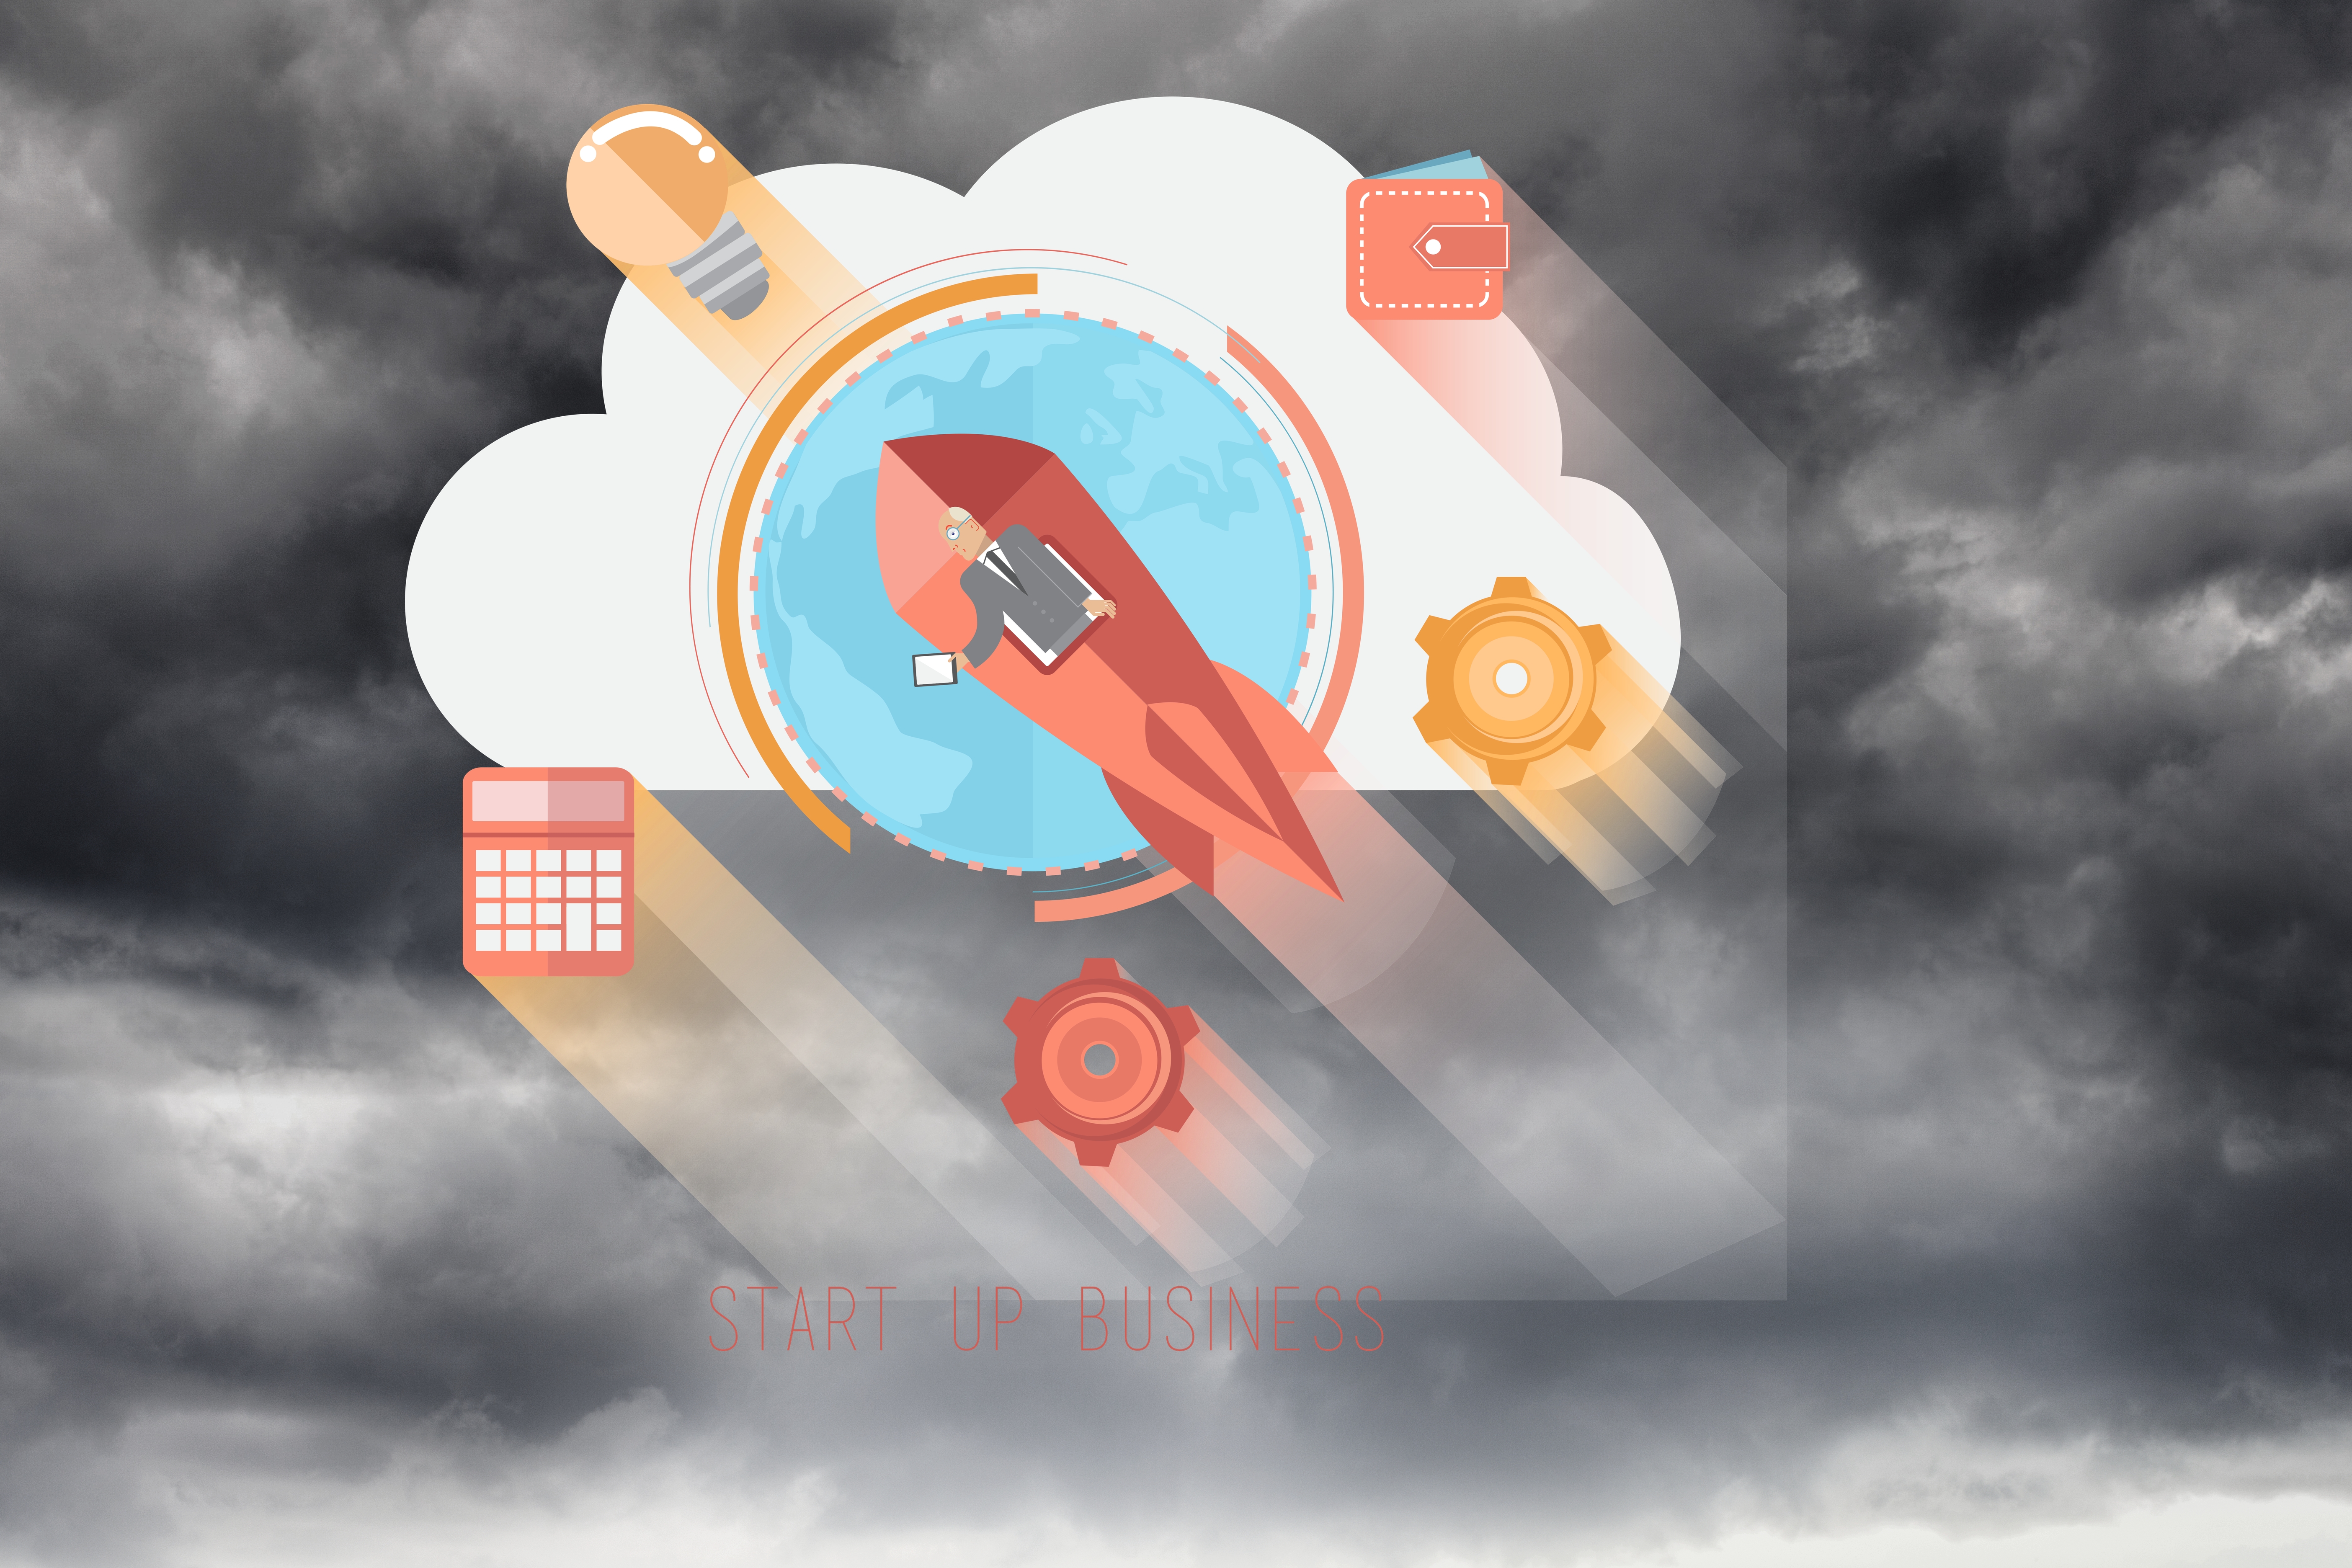 Cloud Provisioning 101: Spin Up Your Infrastructure in Minutes